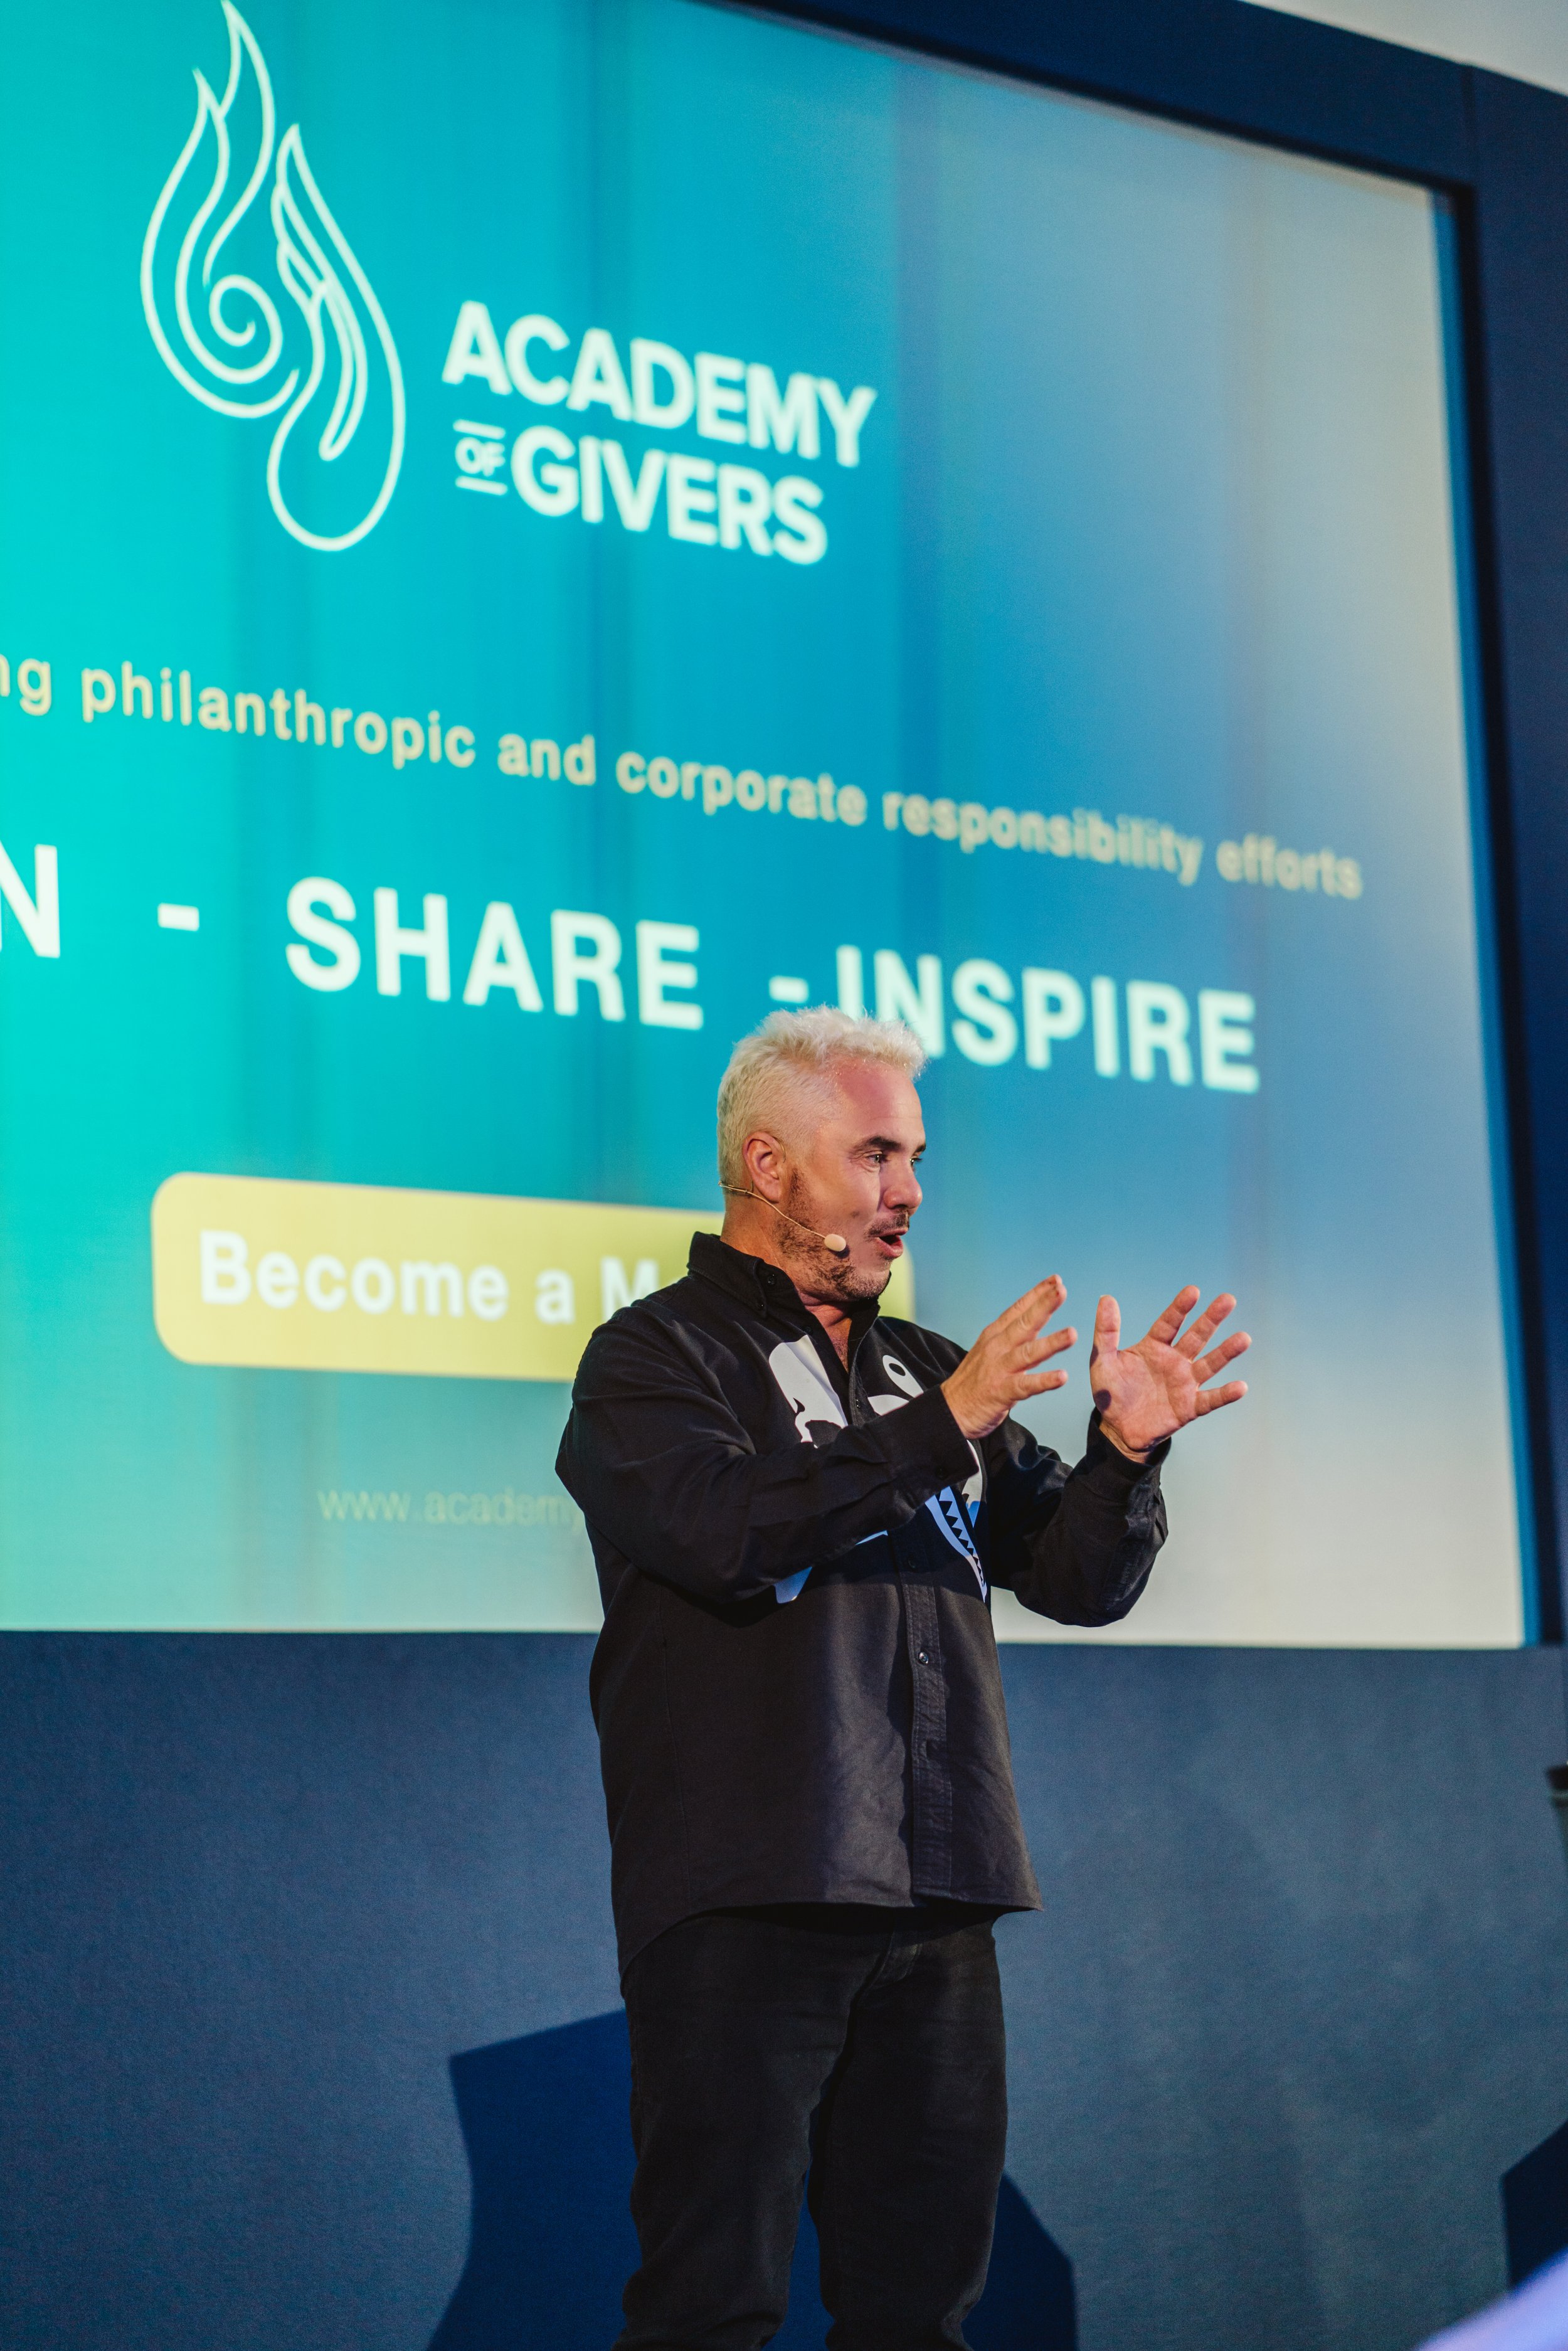 Mark Weingard, Founder of Inspirasia Foundation, one of the founding members of the Academy of Givers.jpg